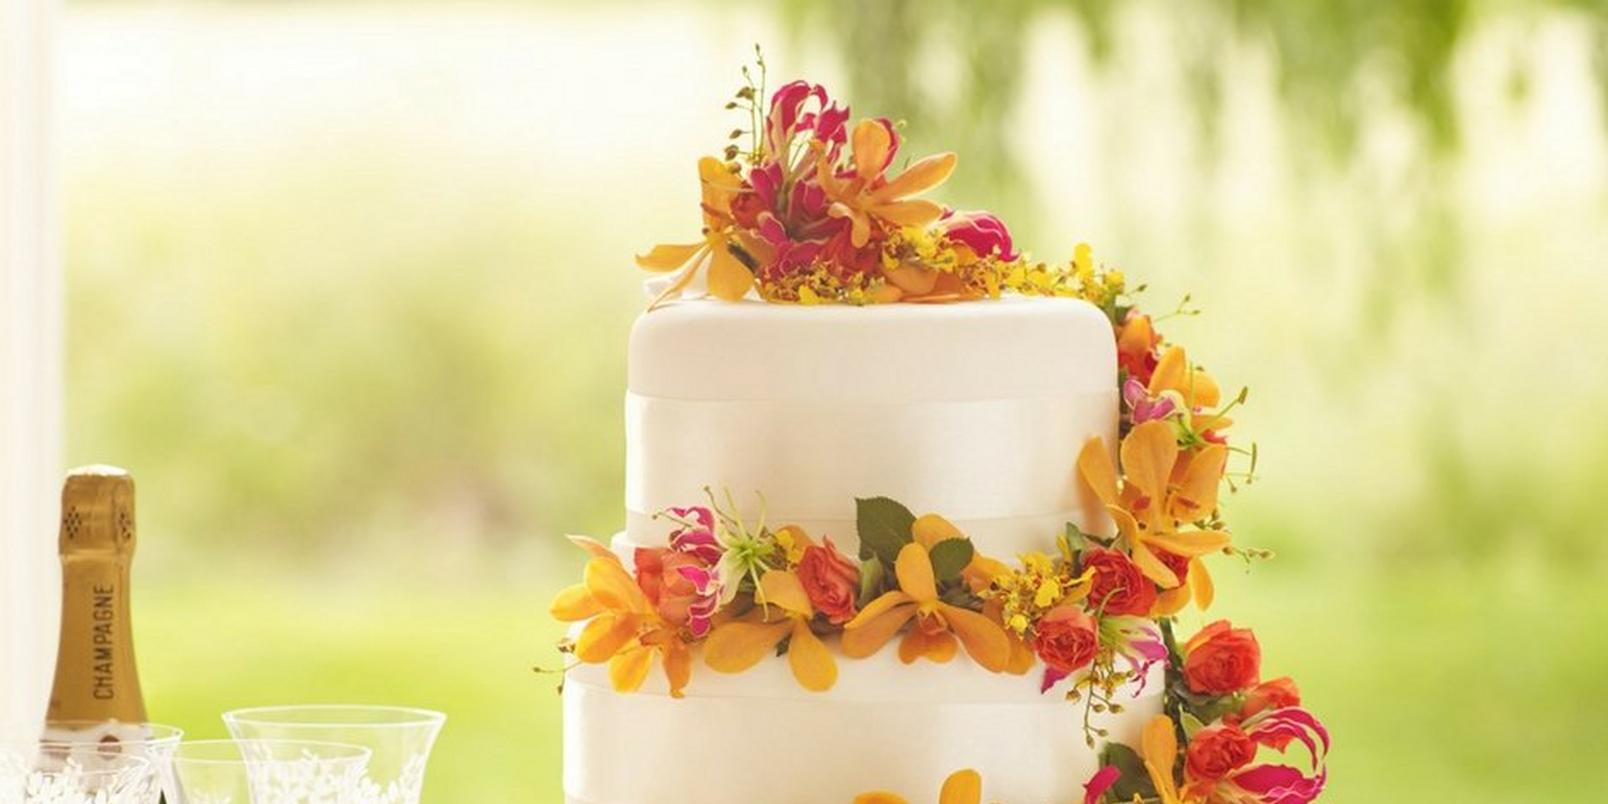 white-wedding-cake-tropical-floral-decorations